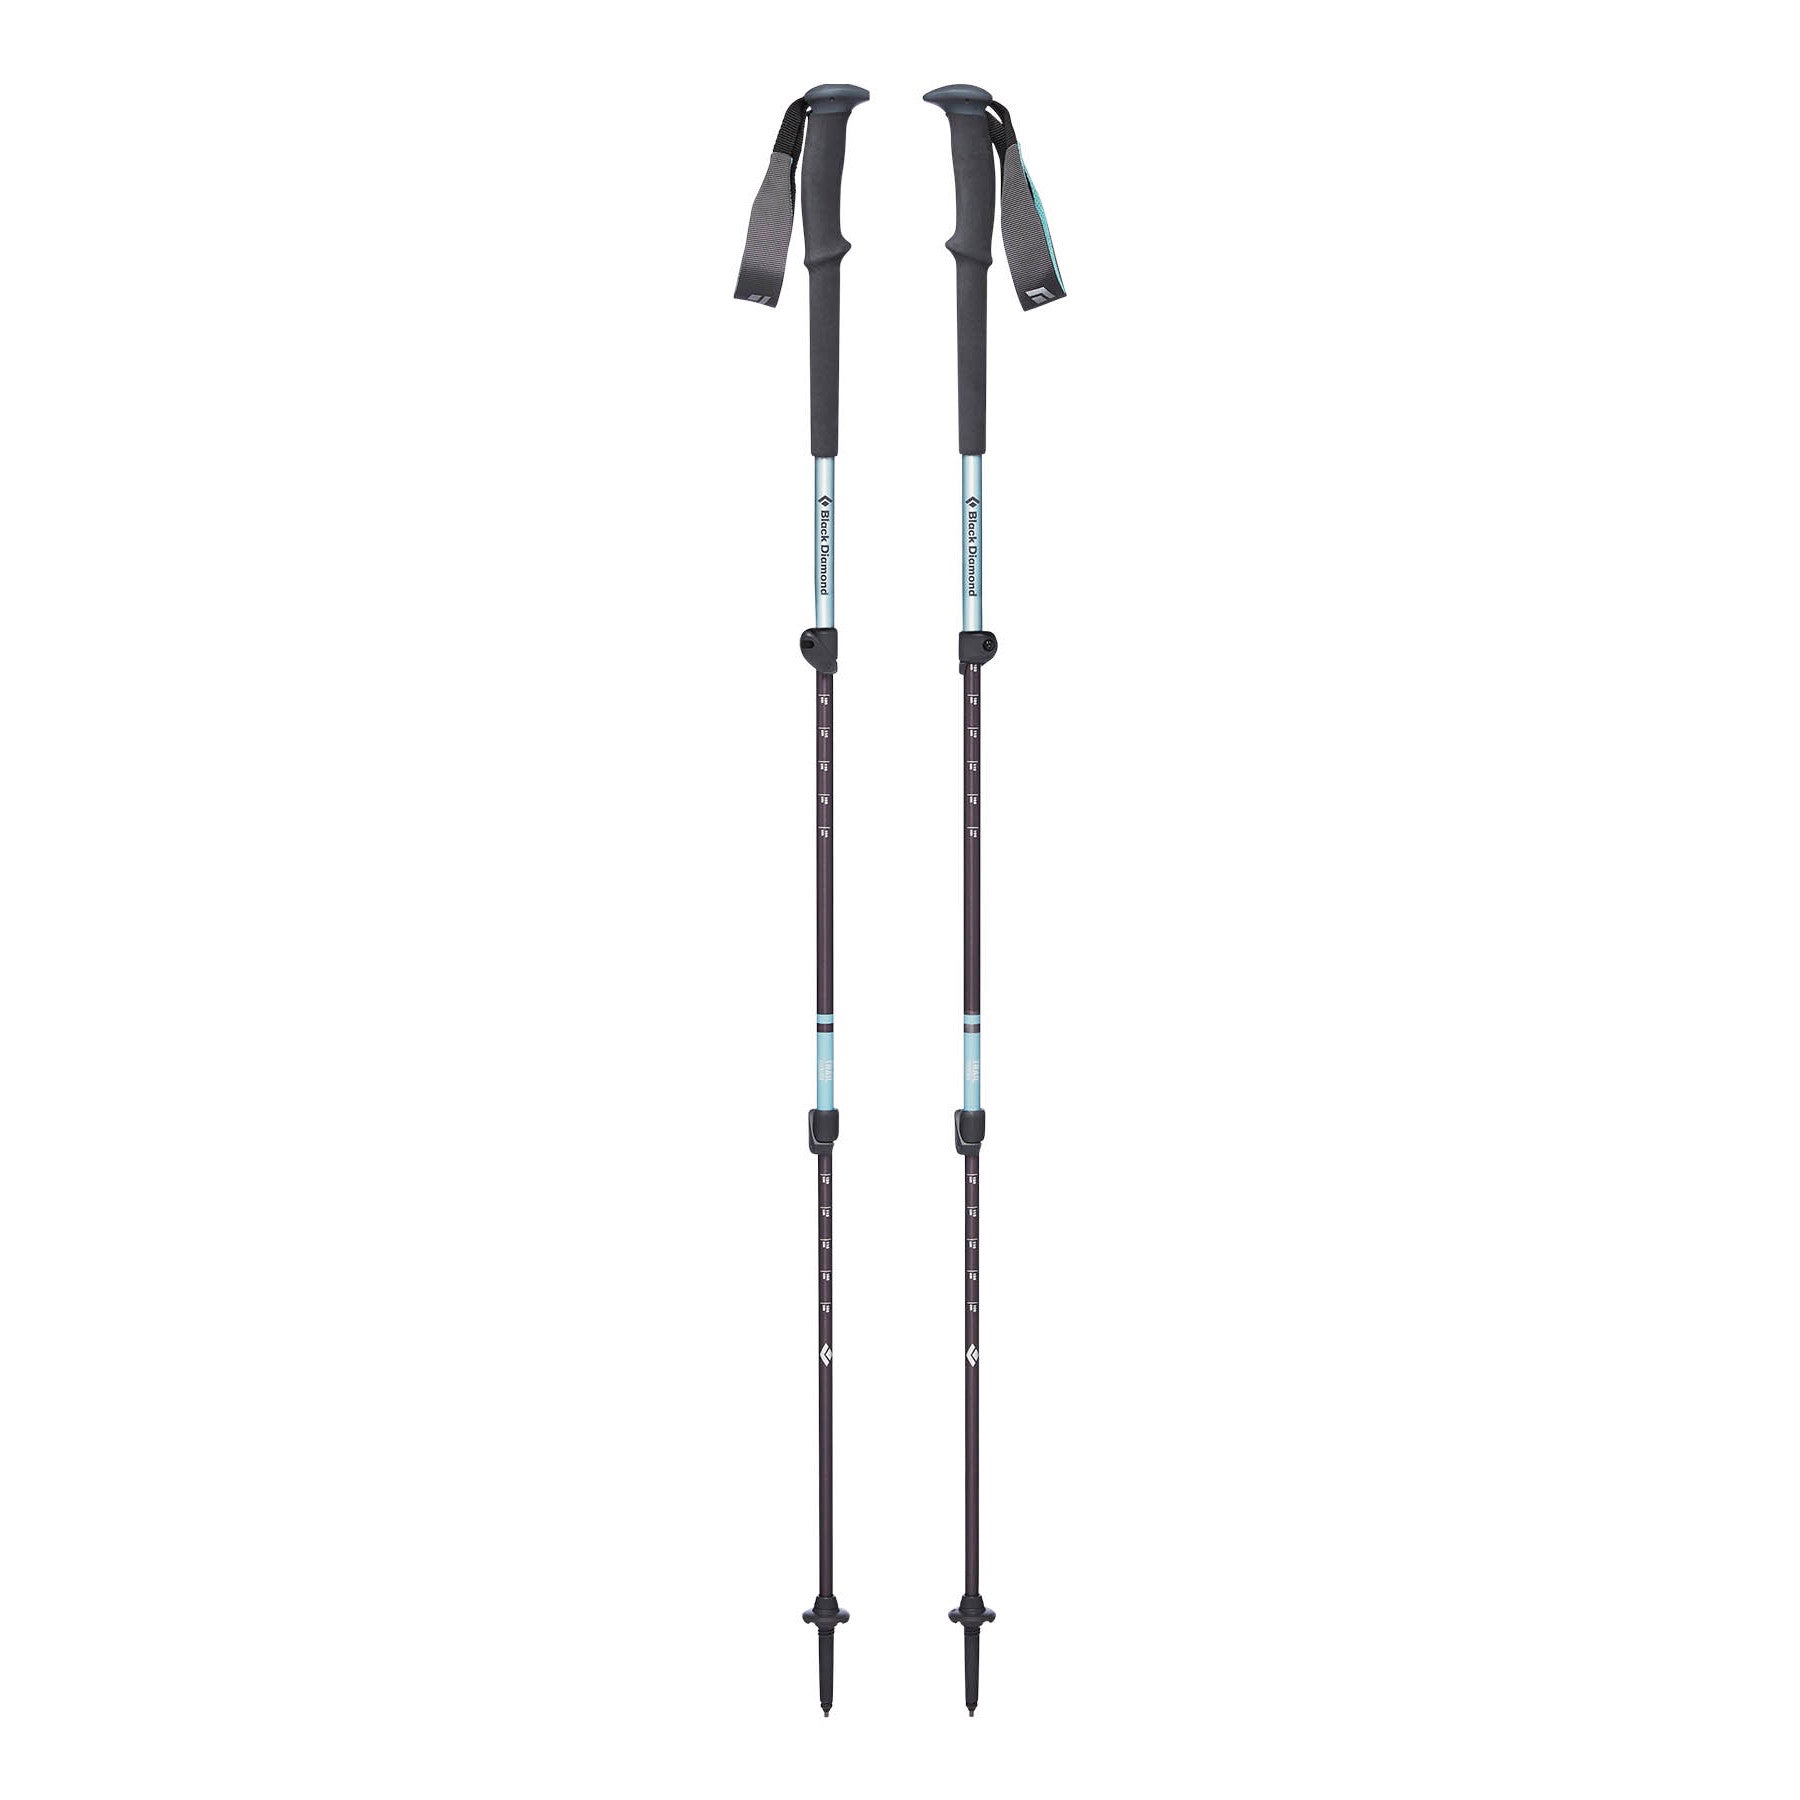 Pair of Black Diamond Trail Women's trekking poles, shown extended and stood up in Light Blue